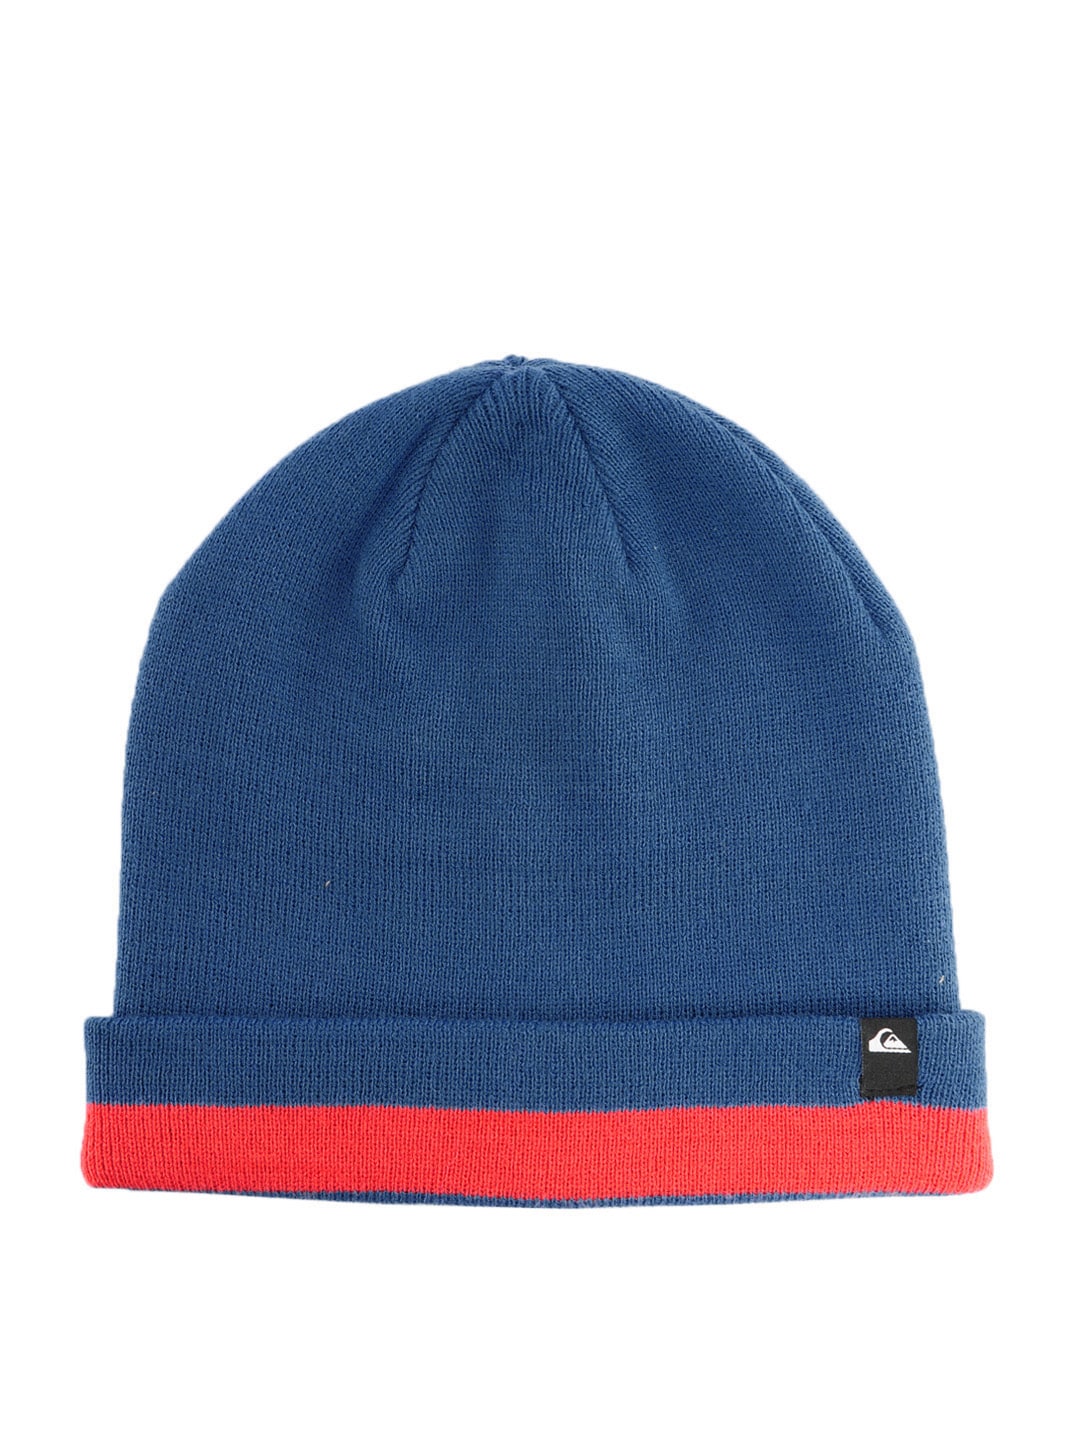 Quiksilver Men Blue Sting Ray Beanie Hat